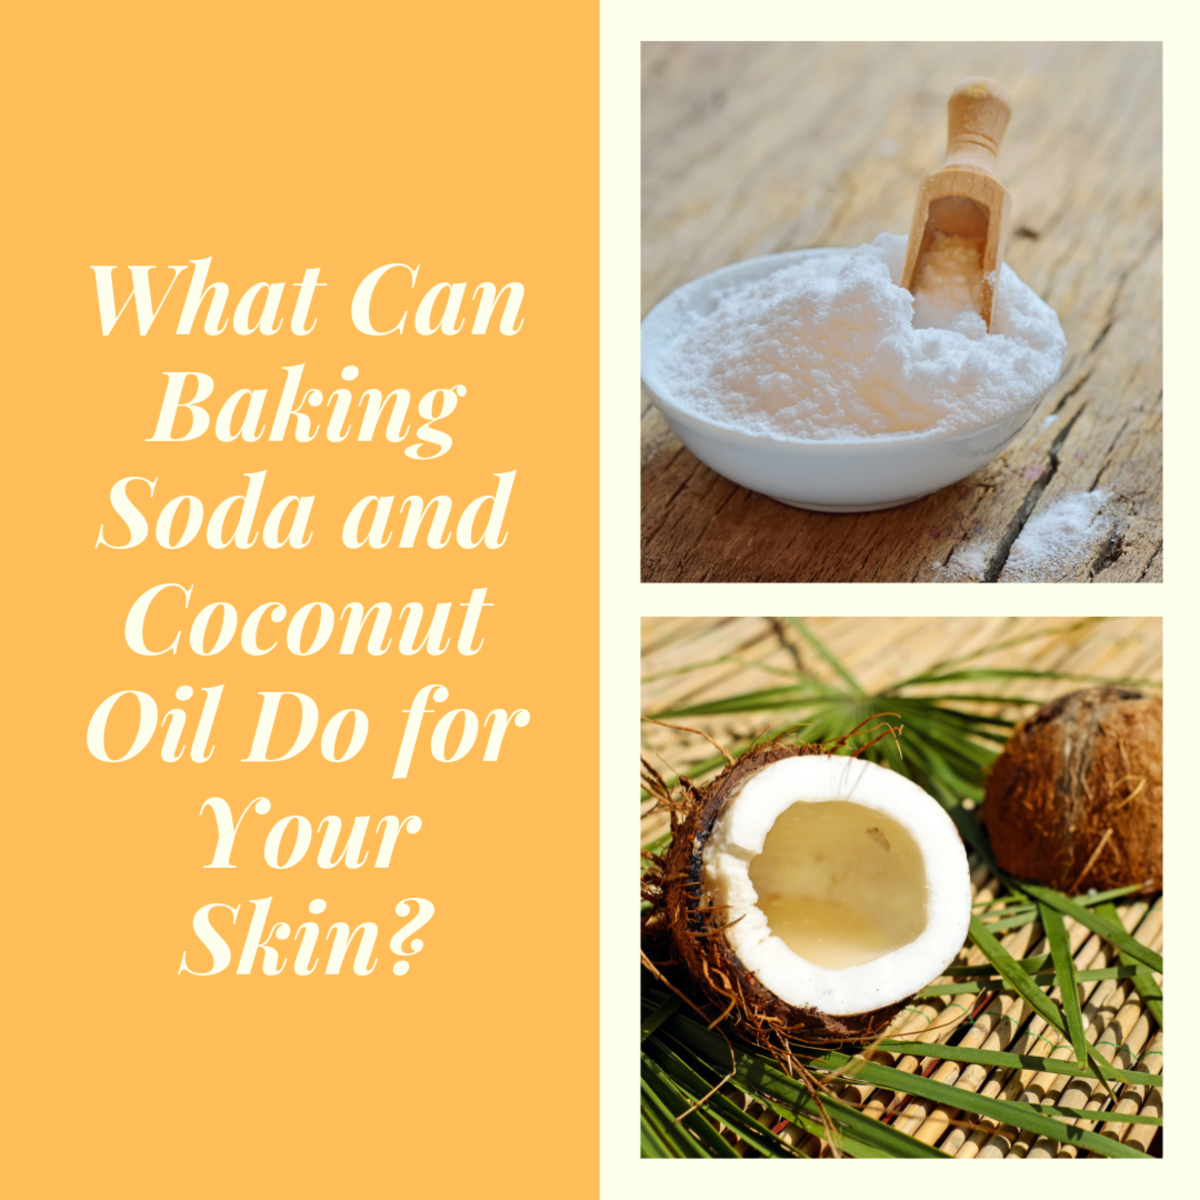 What Can Baking Soda and Coconut Oil Do for Your Skin?